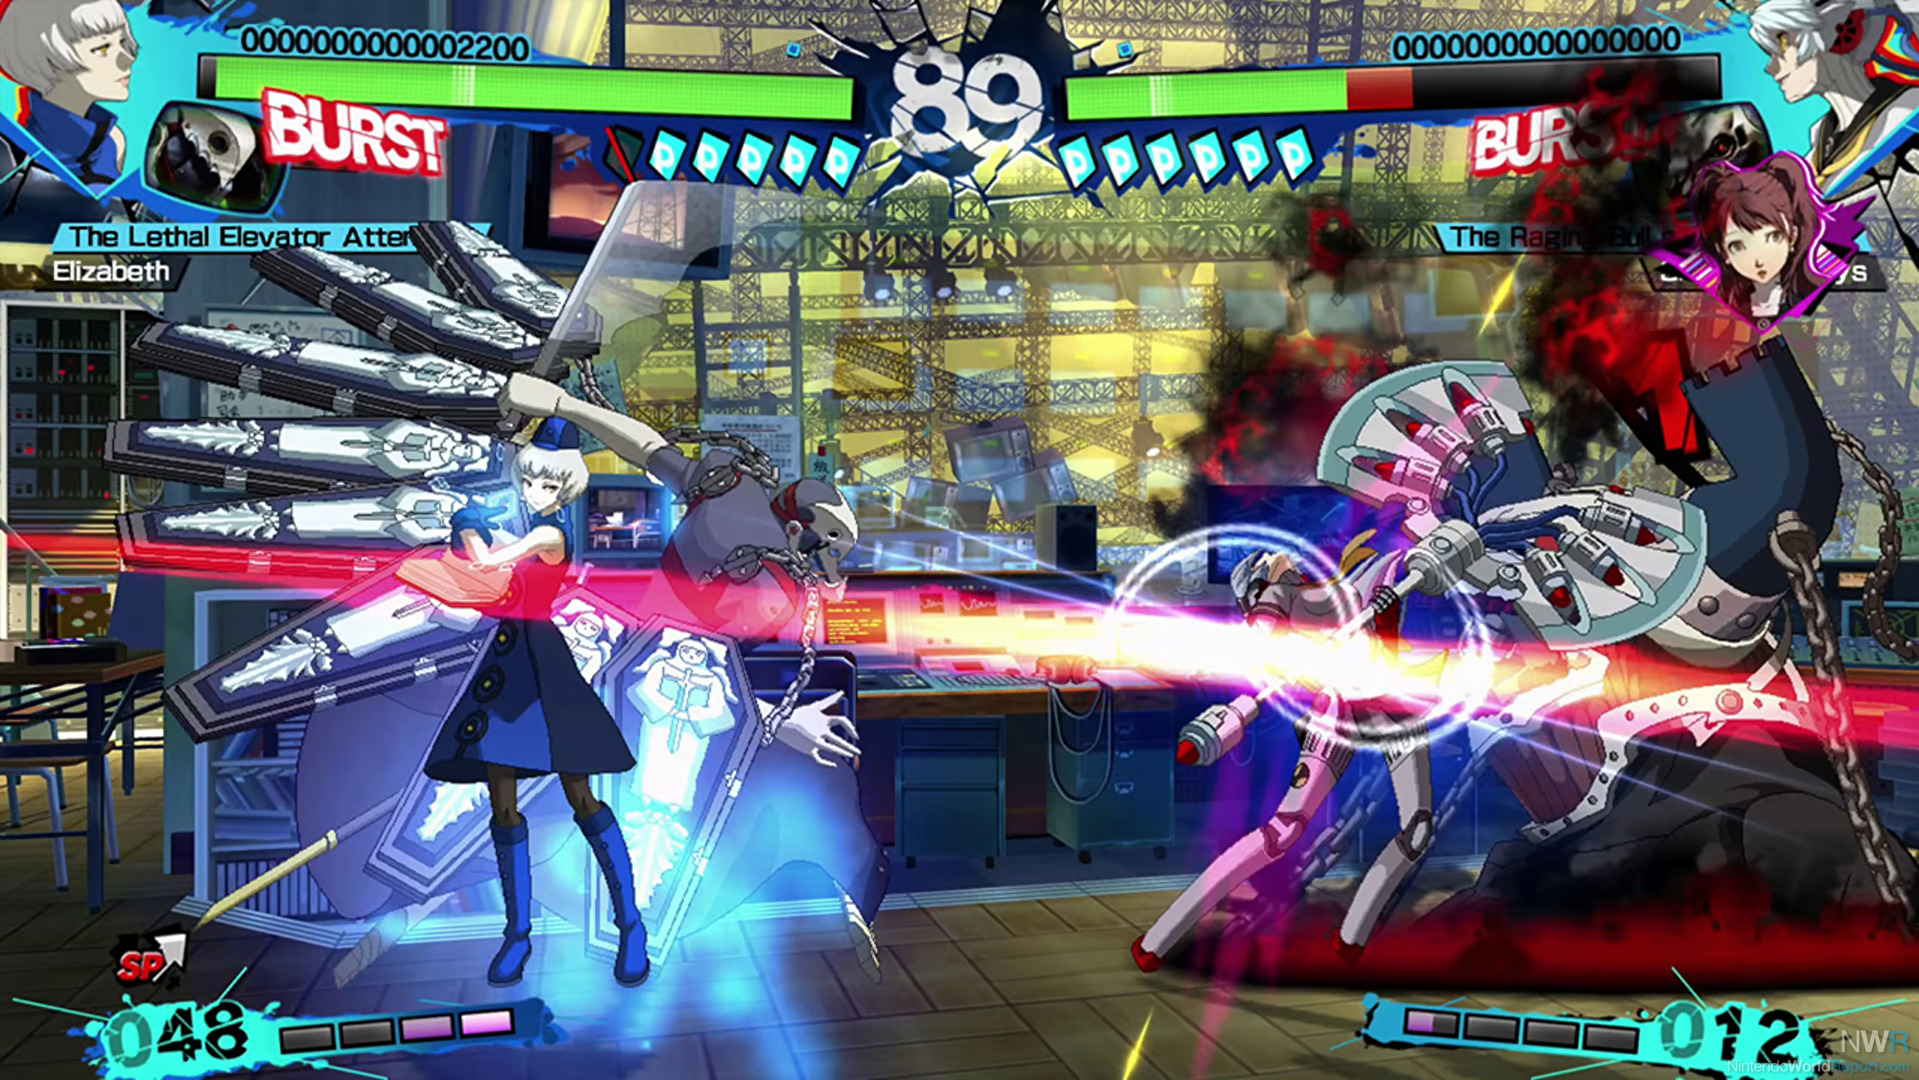 Persona 4 Arena Ultimax Review - Review - Nintendo World Report